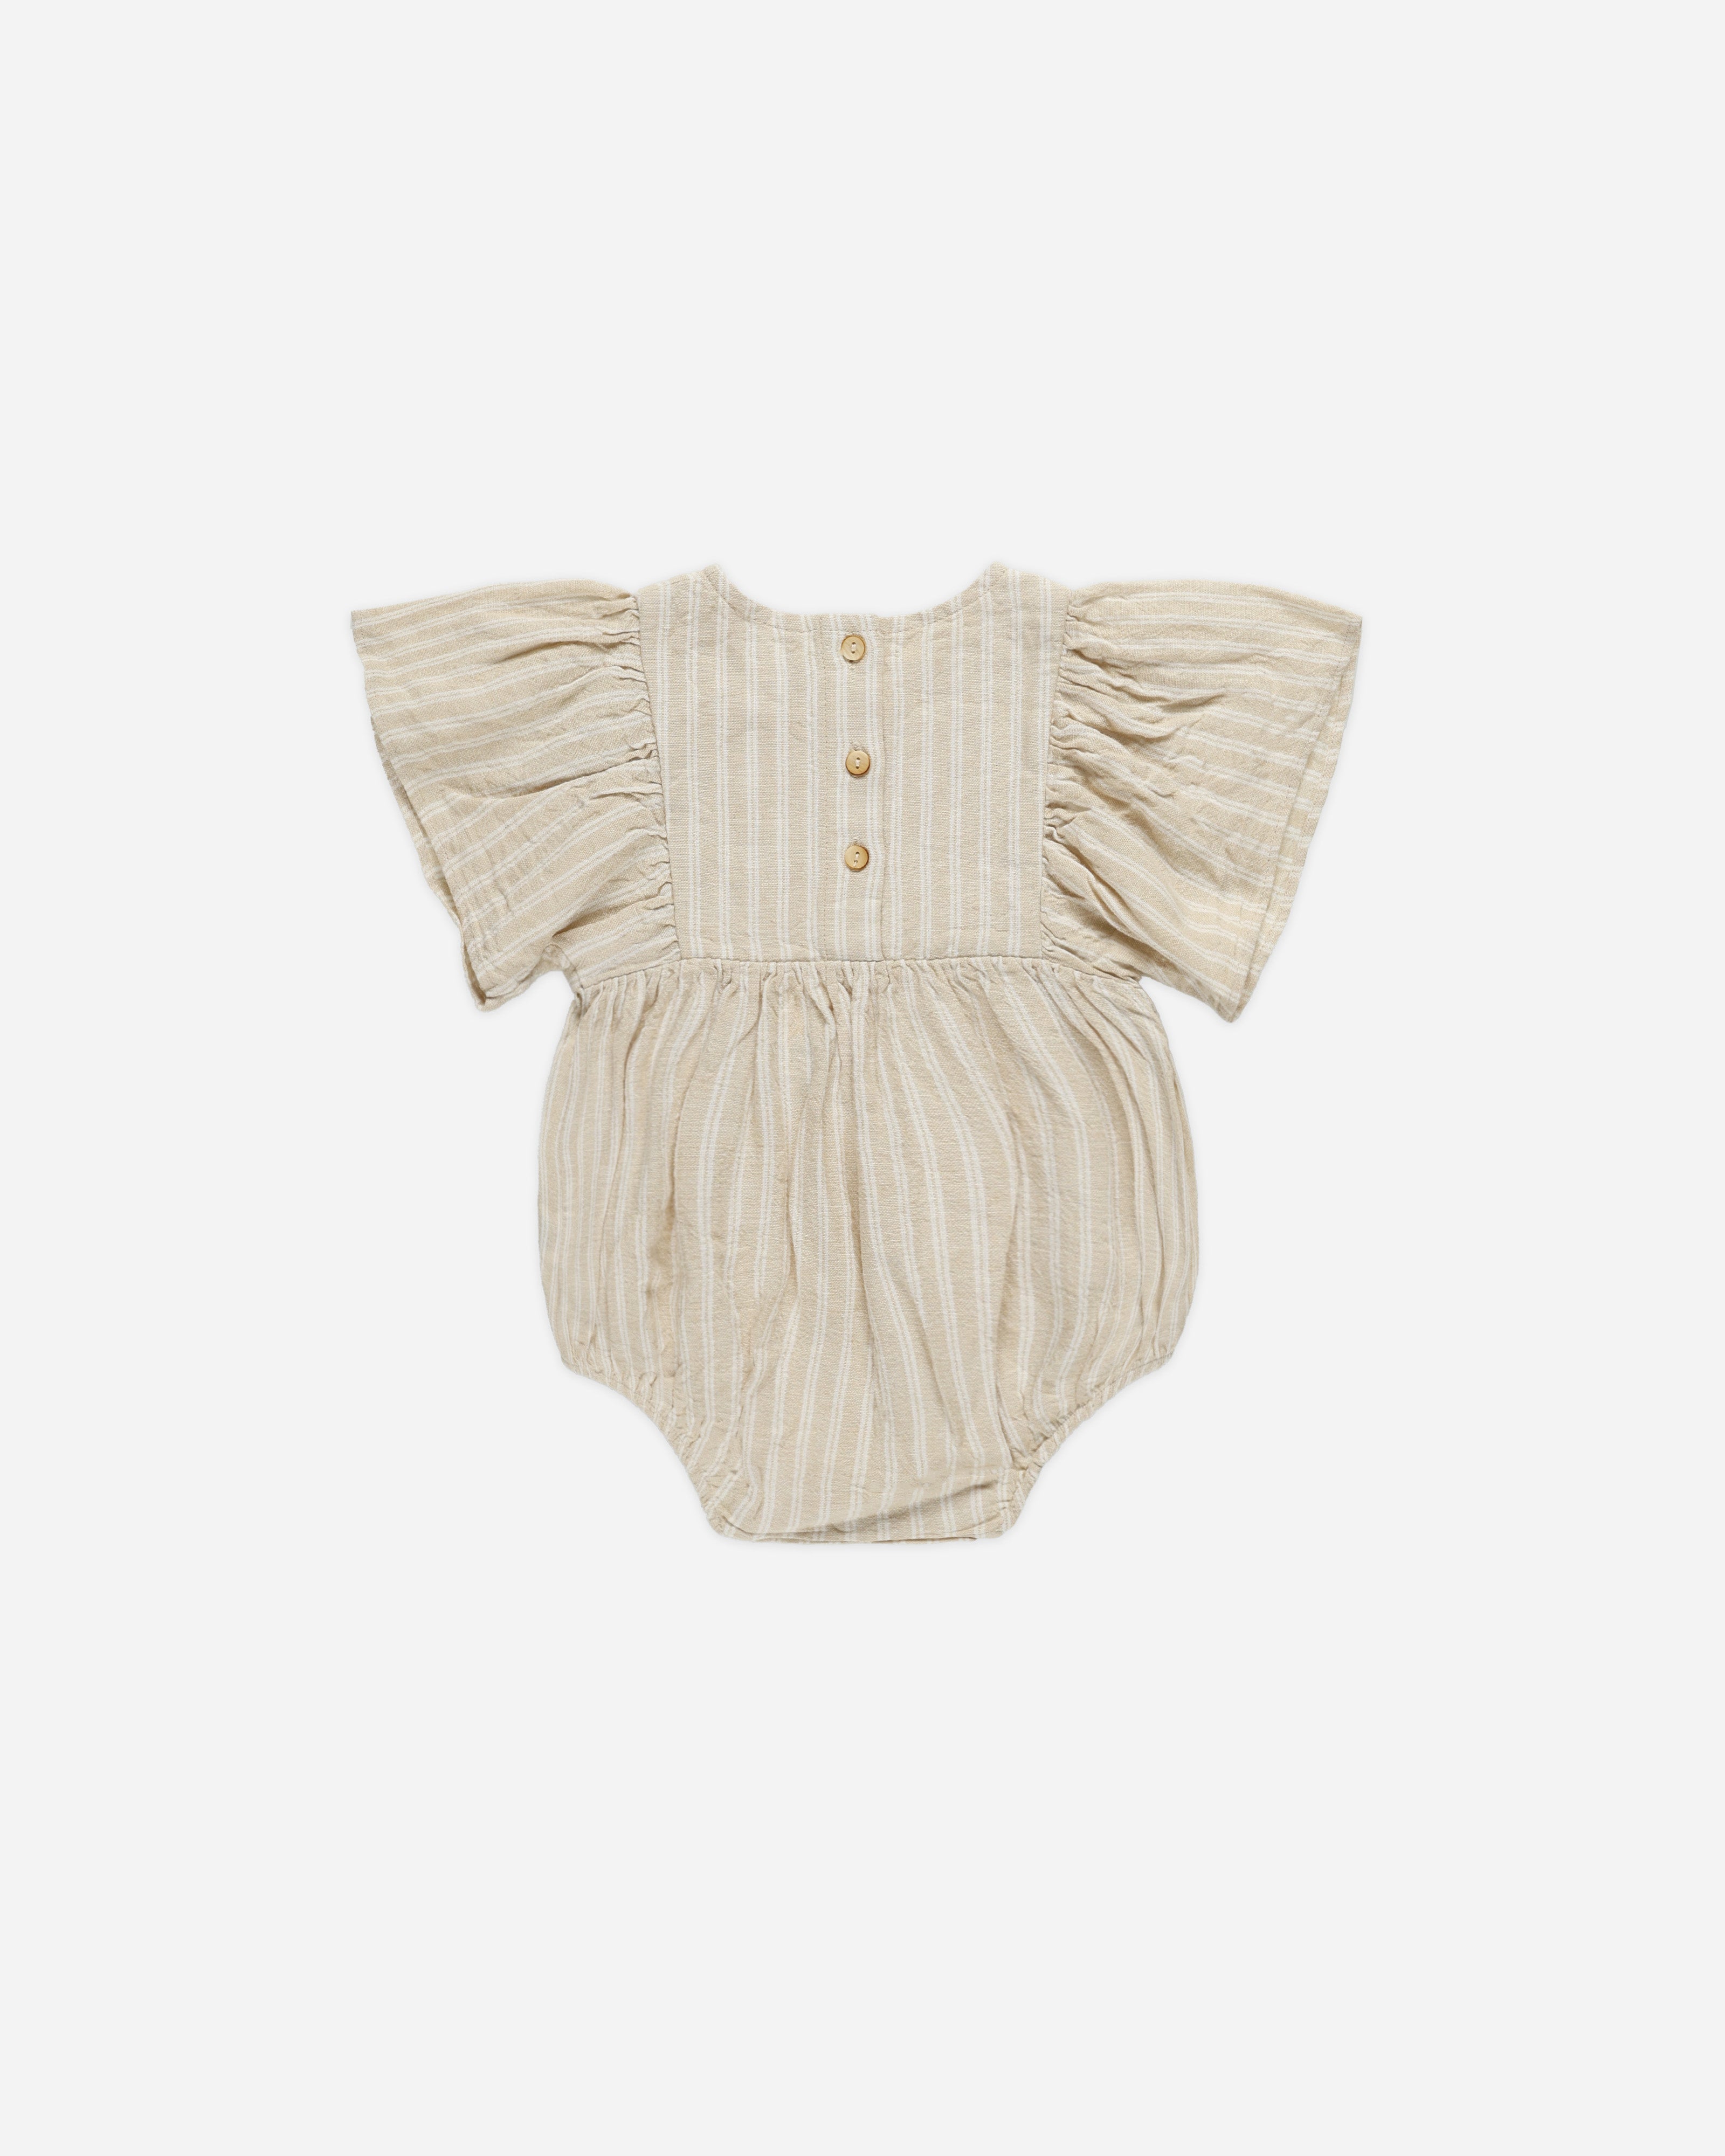 Kalea Romper || Champagne Stripe - Rylee + Cru | Kids Clothes | Trendy Baby Clothes | Modern Infant Outfits |